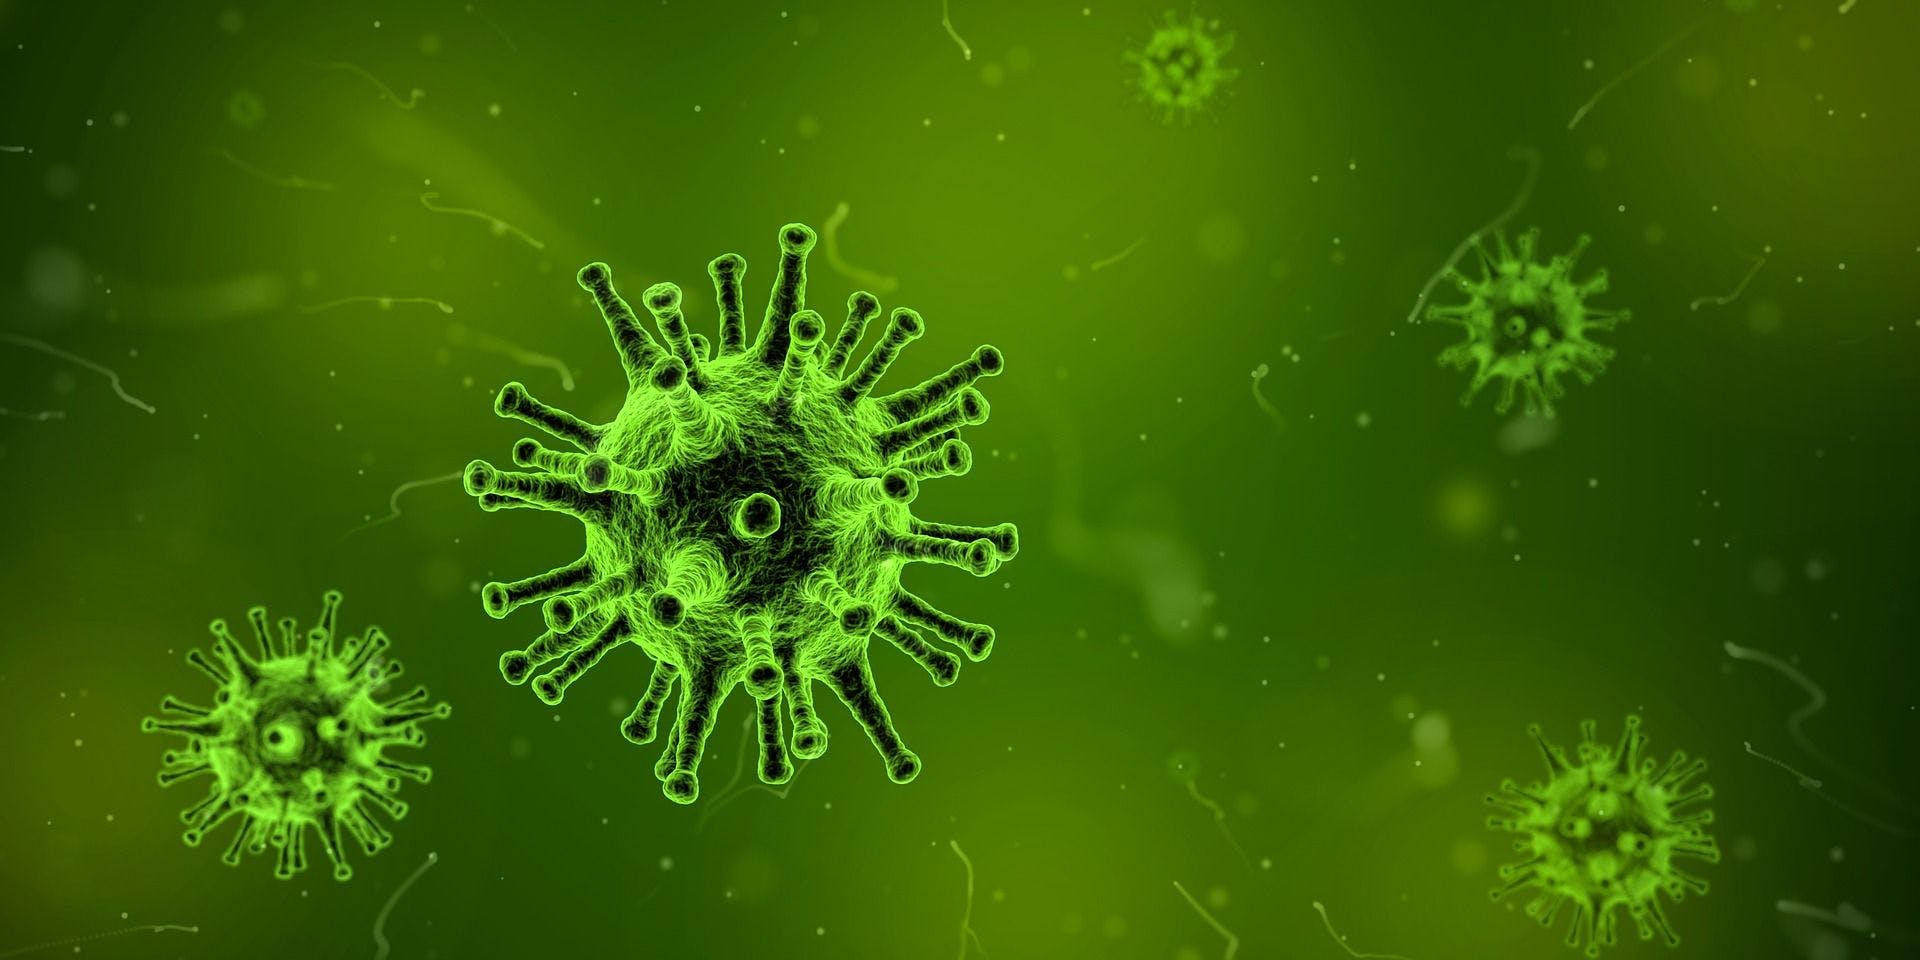 Study Shows Baloxavir Marboxil May Prevent Influenza Infection